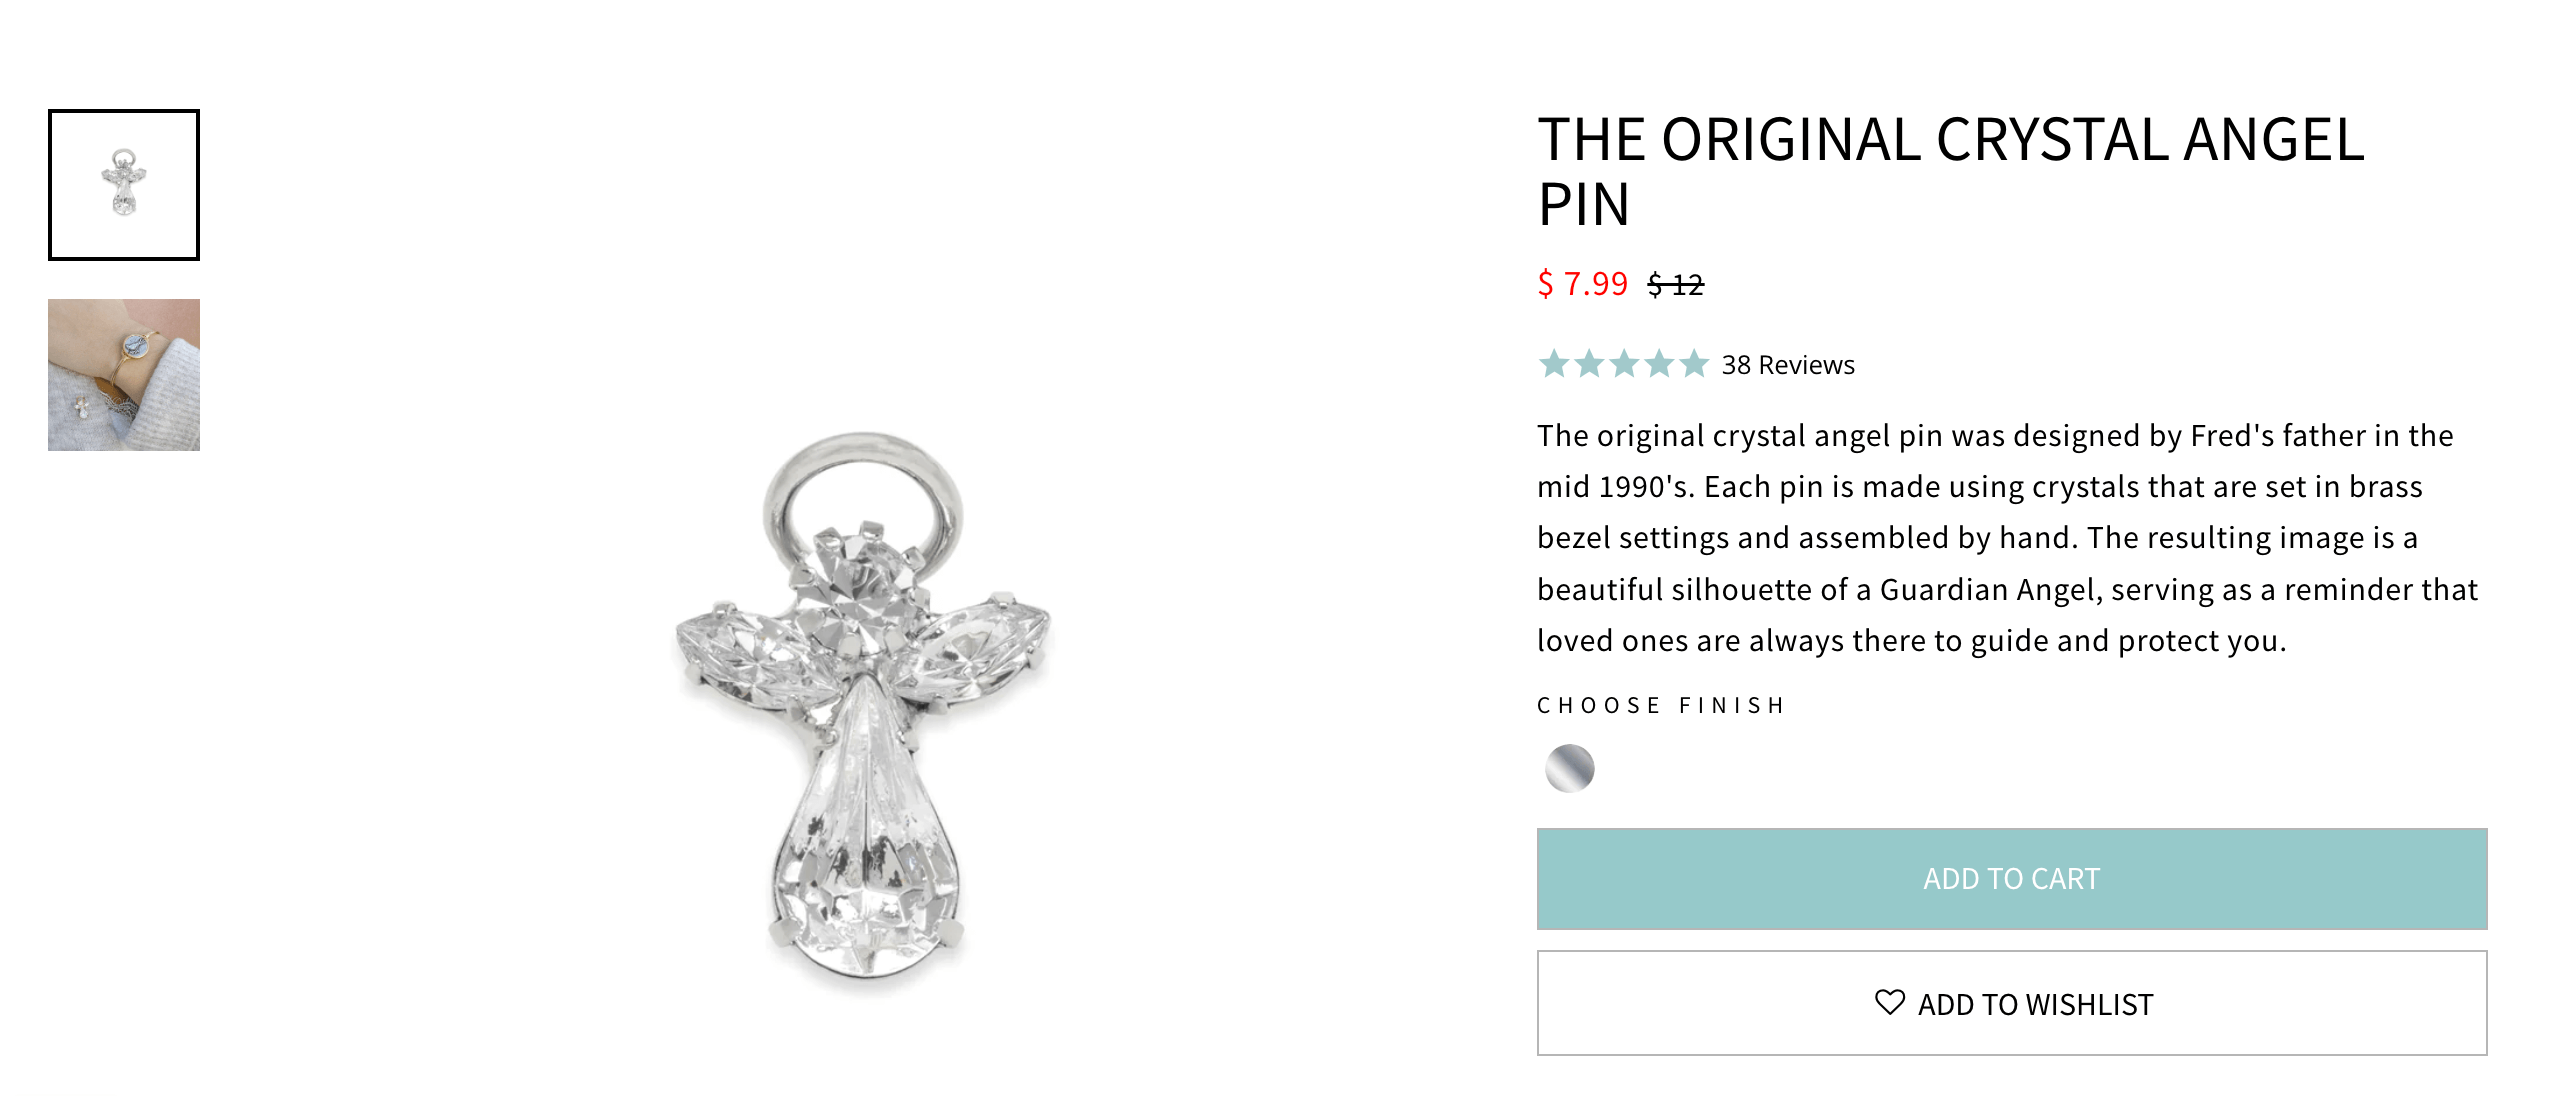 Storytelling Brands–A screenshot from Luca + Danni’s product page for The Original Crystal Angel Pin. There is an image of a crystal pin shaped like an angel next to the following product description: The original crystal angel pin was designed by Fred's father in the mid 1990's. Each pin is made using crystals that are set in brass bezel settings and assembled by hand. The resulting image is a beautiful silhouette of a Guardian Angel, serving as a reminder that loved ones are always there to guide and protect you. 